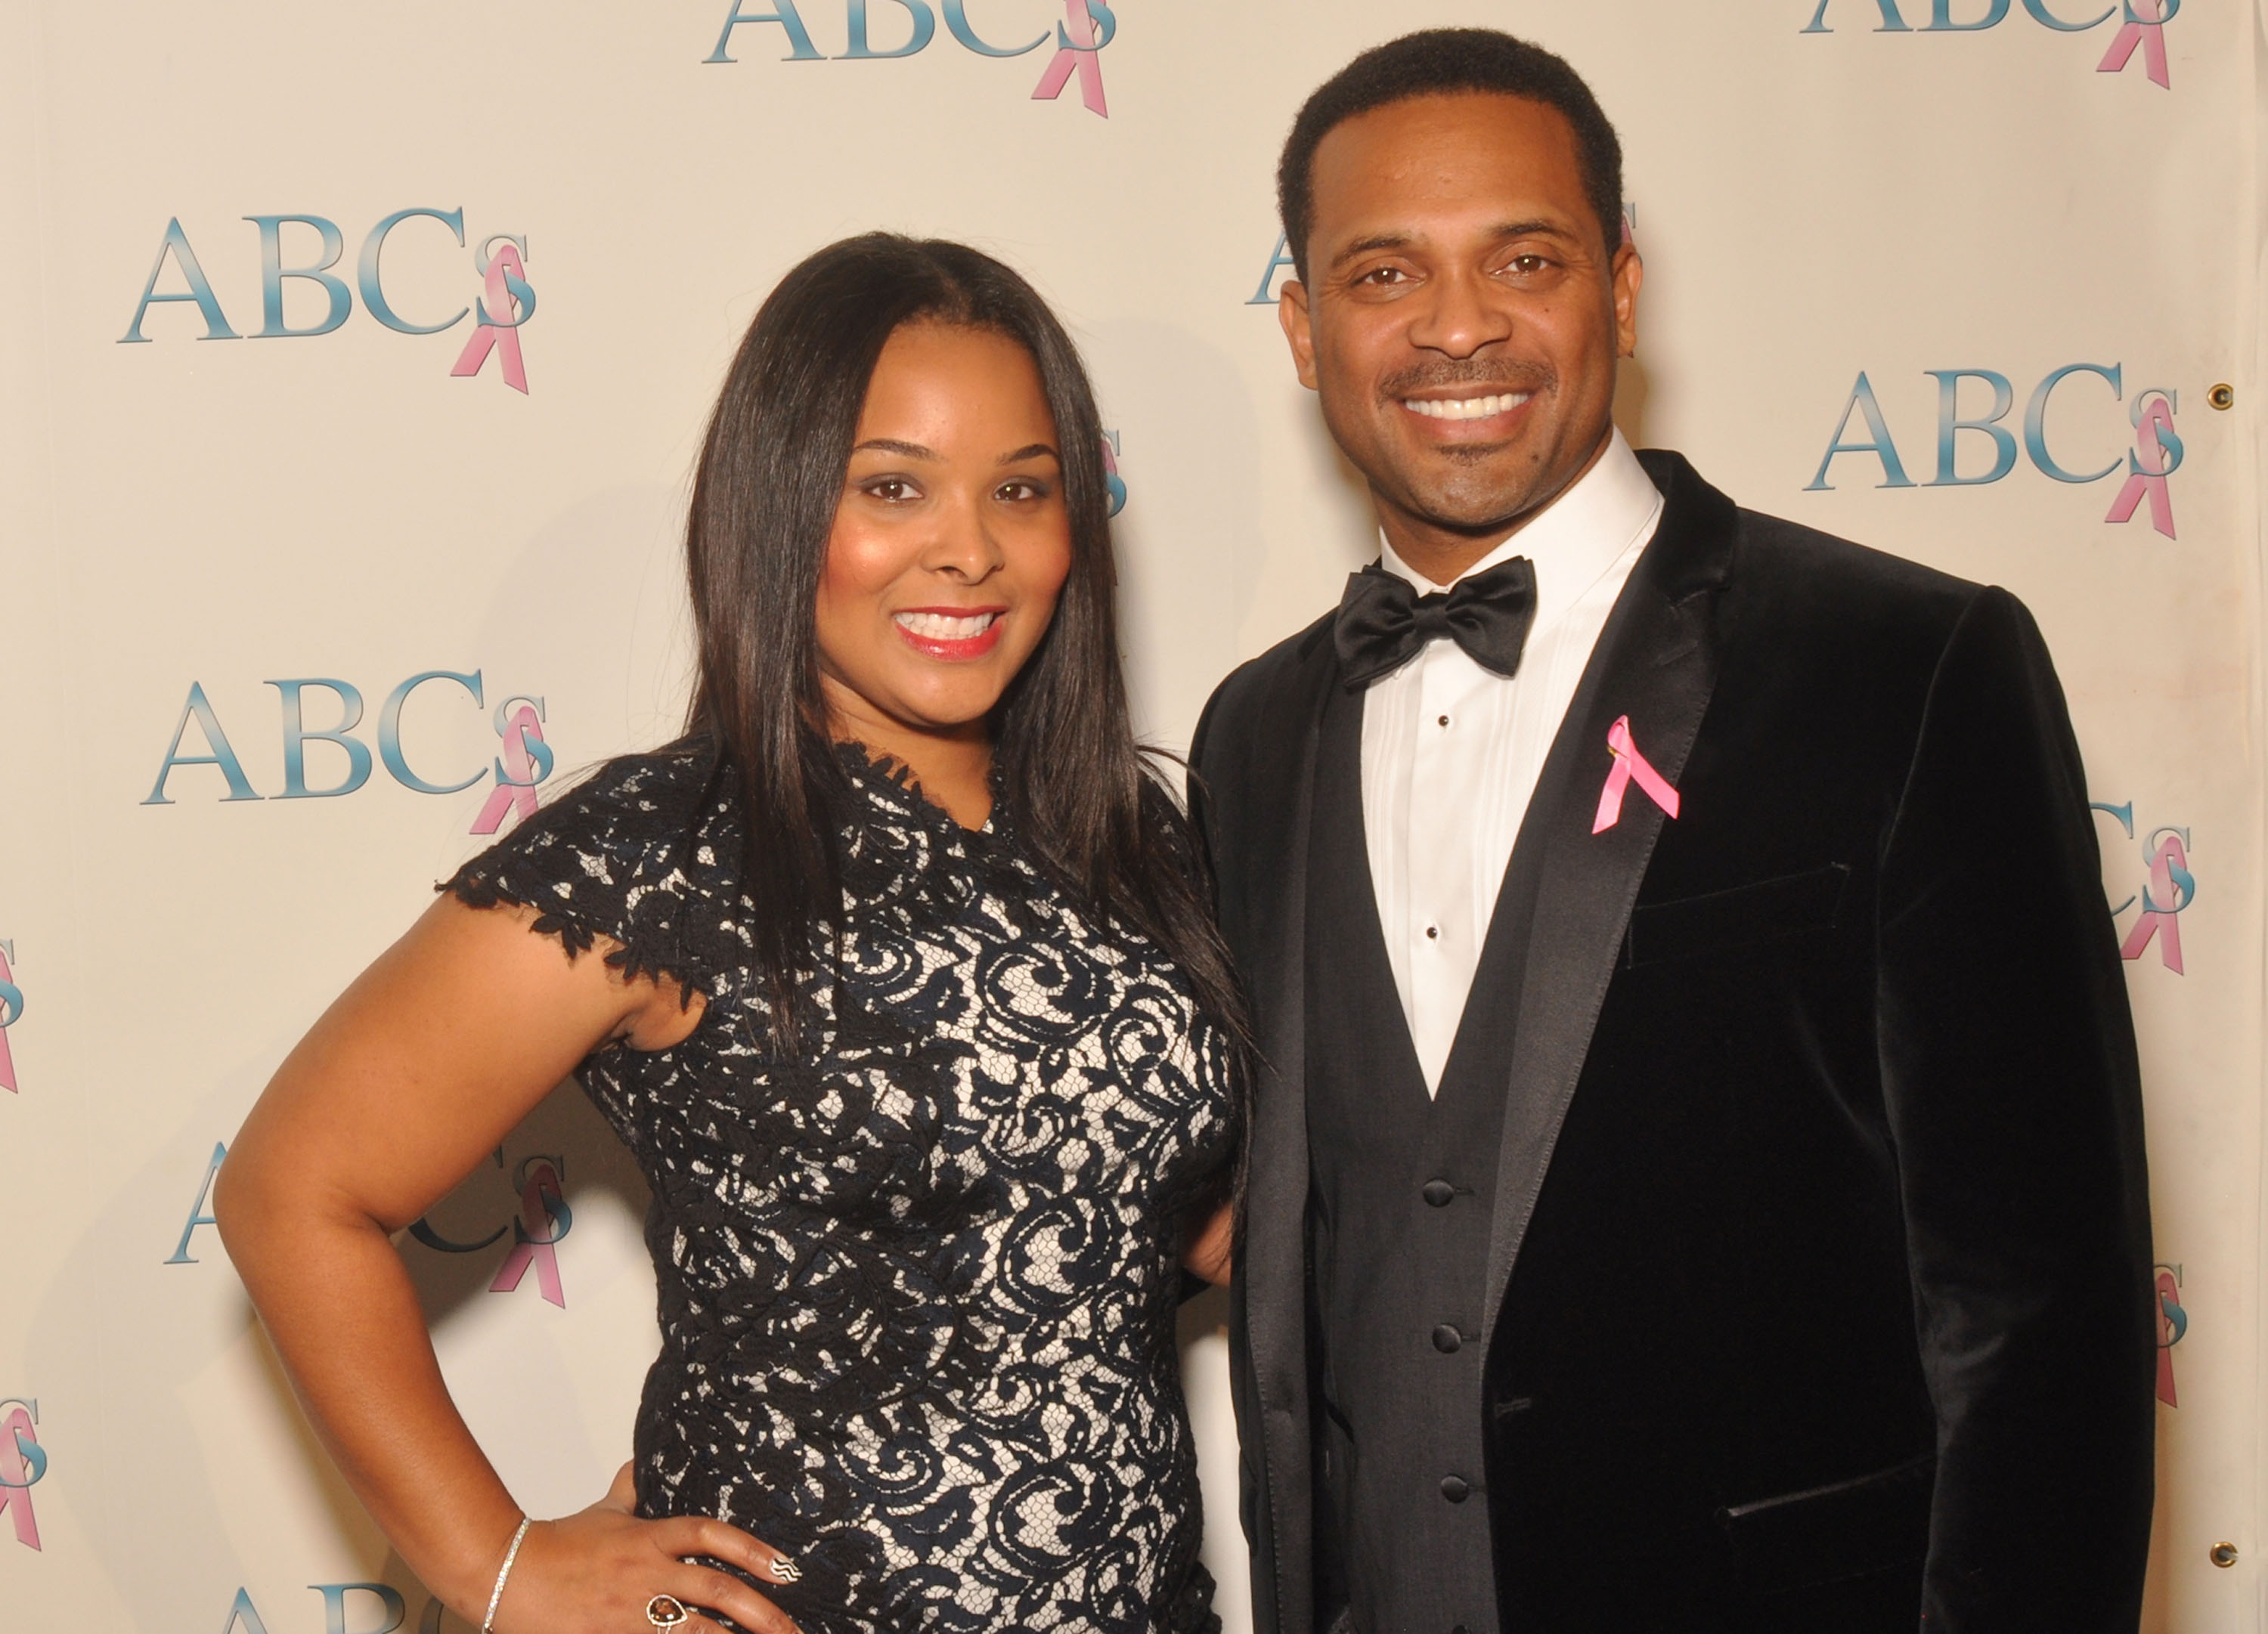 Mike Epps’ ExWife Wants 109K Monthly Support Payments 93.1 WZAK